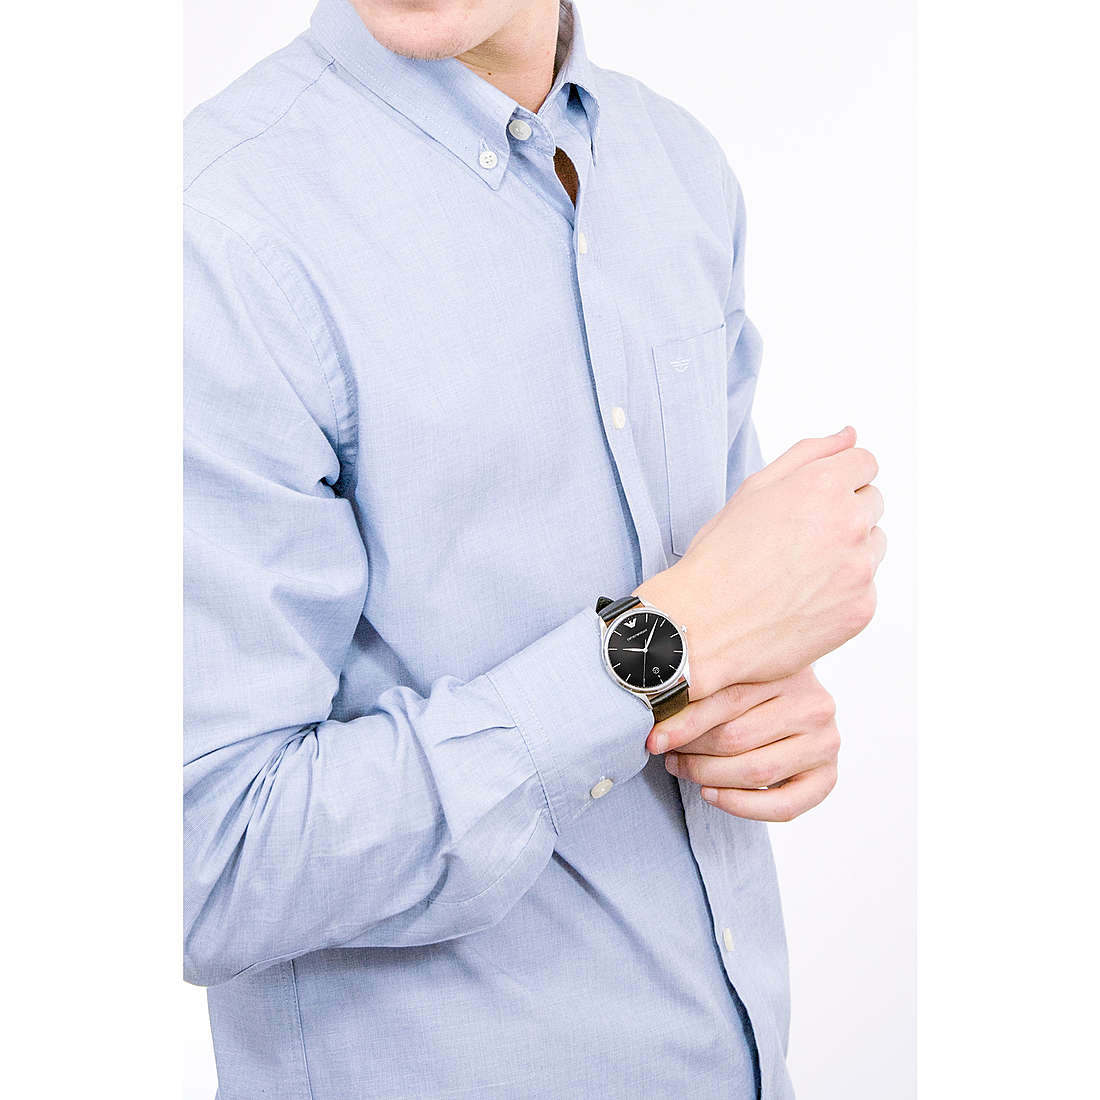 Emporio Armani only time man AR11287 wearing